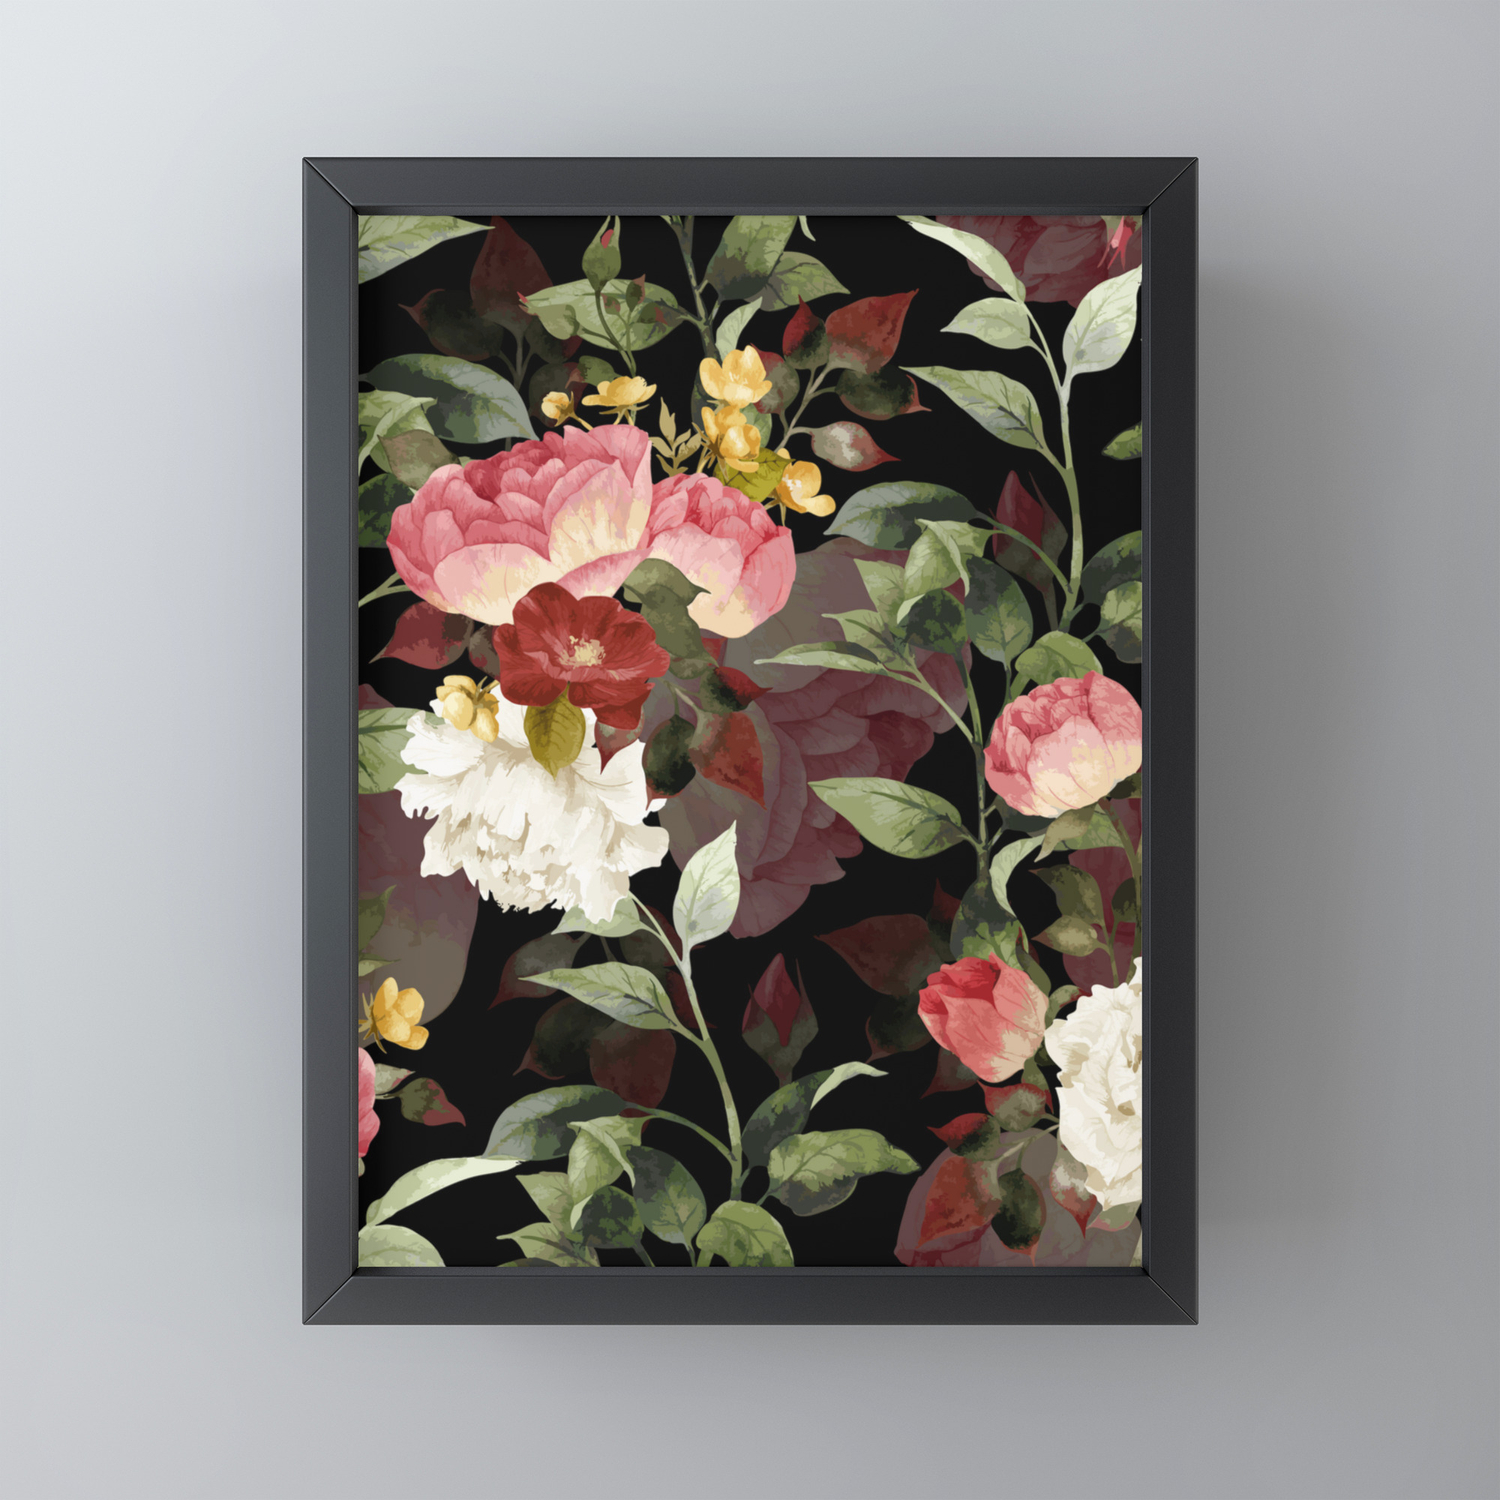 DEEP FRAMED CANVAS WALL ART PICTURE PAPER PRINT FLORAL BLOSSOM 6 PINK BLACK 